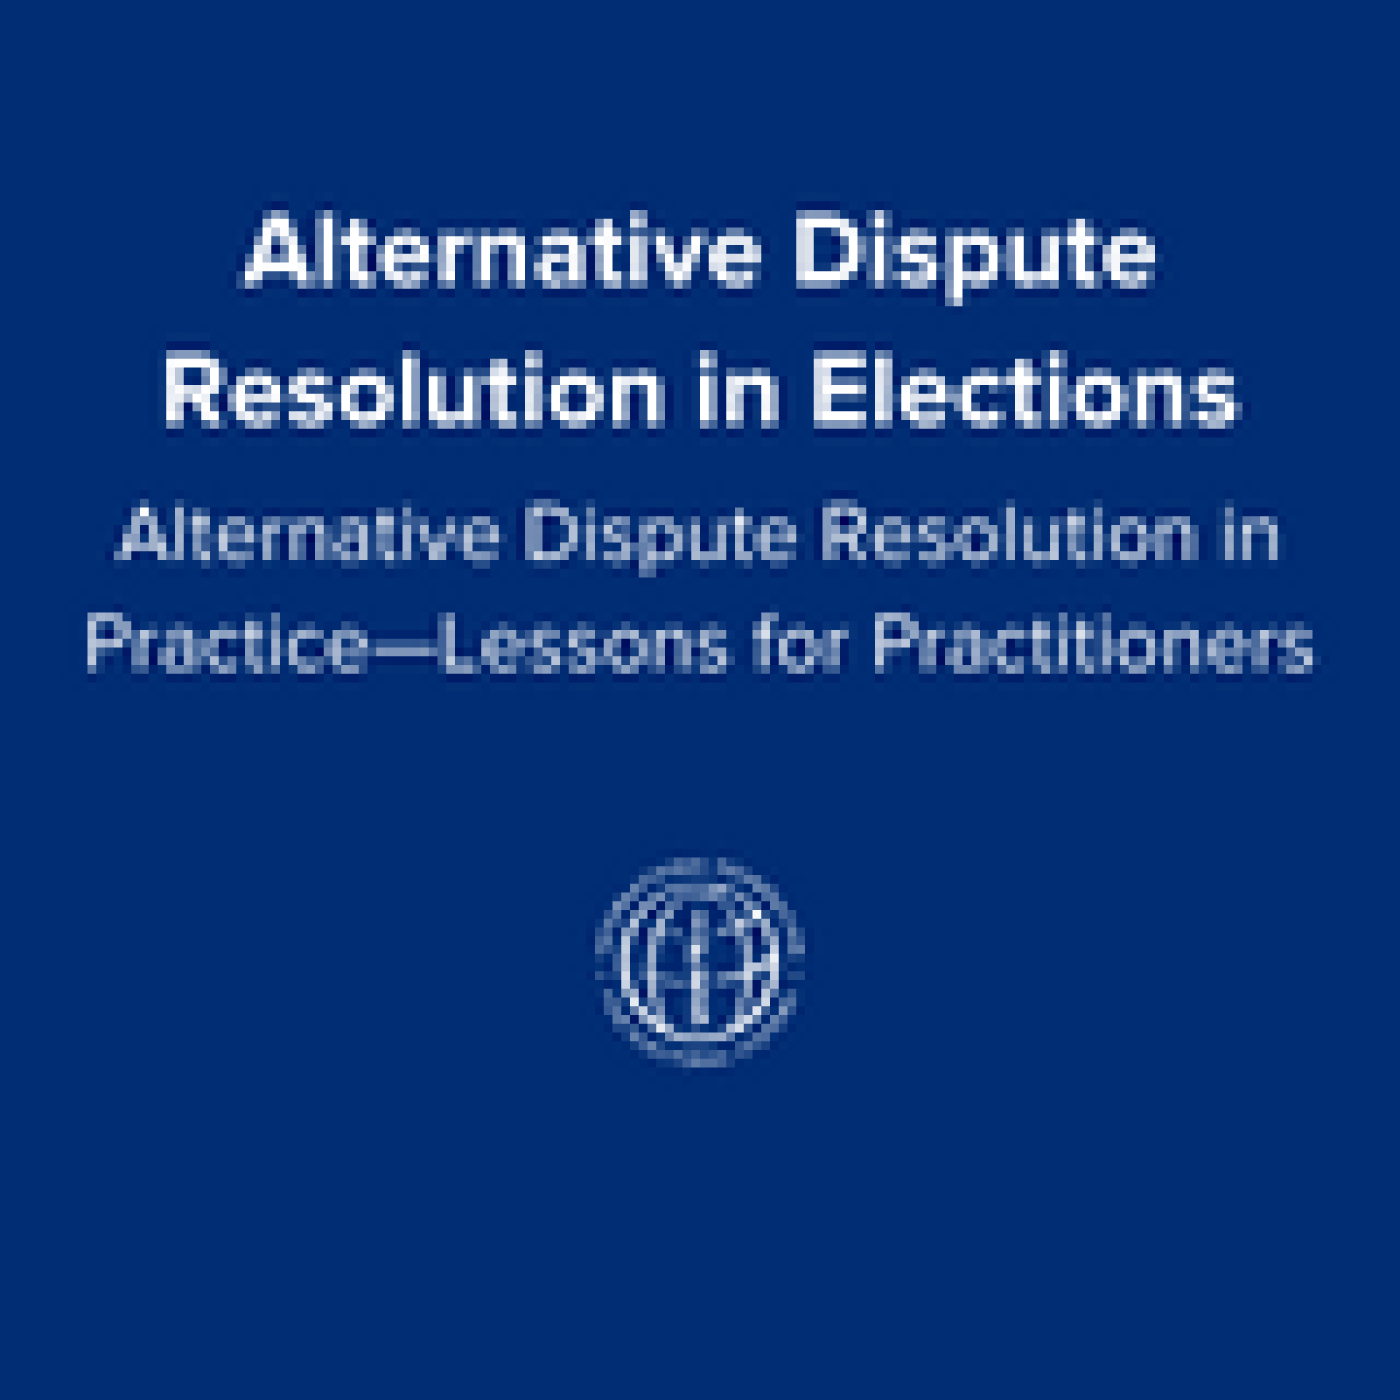 Alternative Dispute Resolution Practitioner Brief Alternative Dispute Resolution in Practice—Lessons for Practitioners.pdf